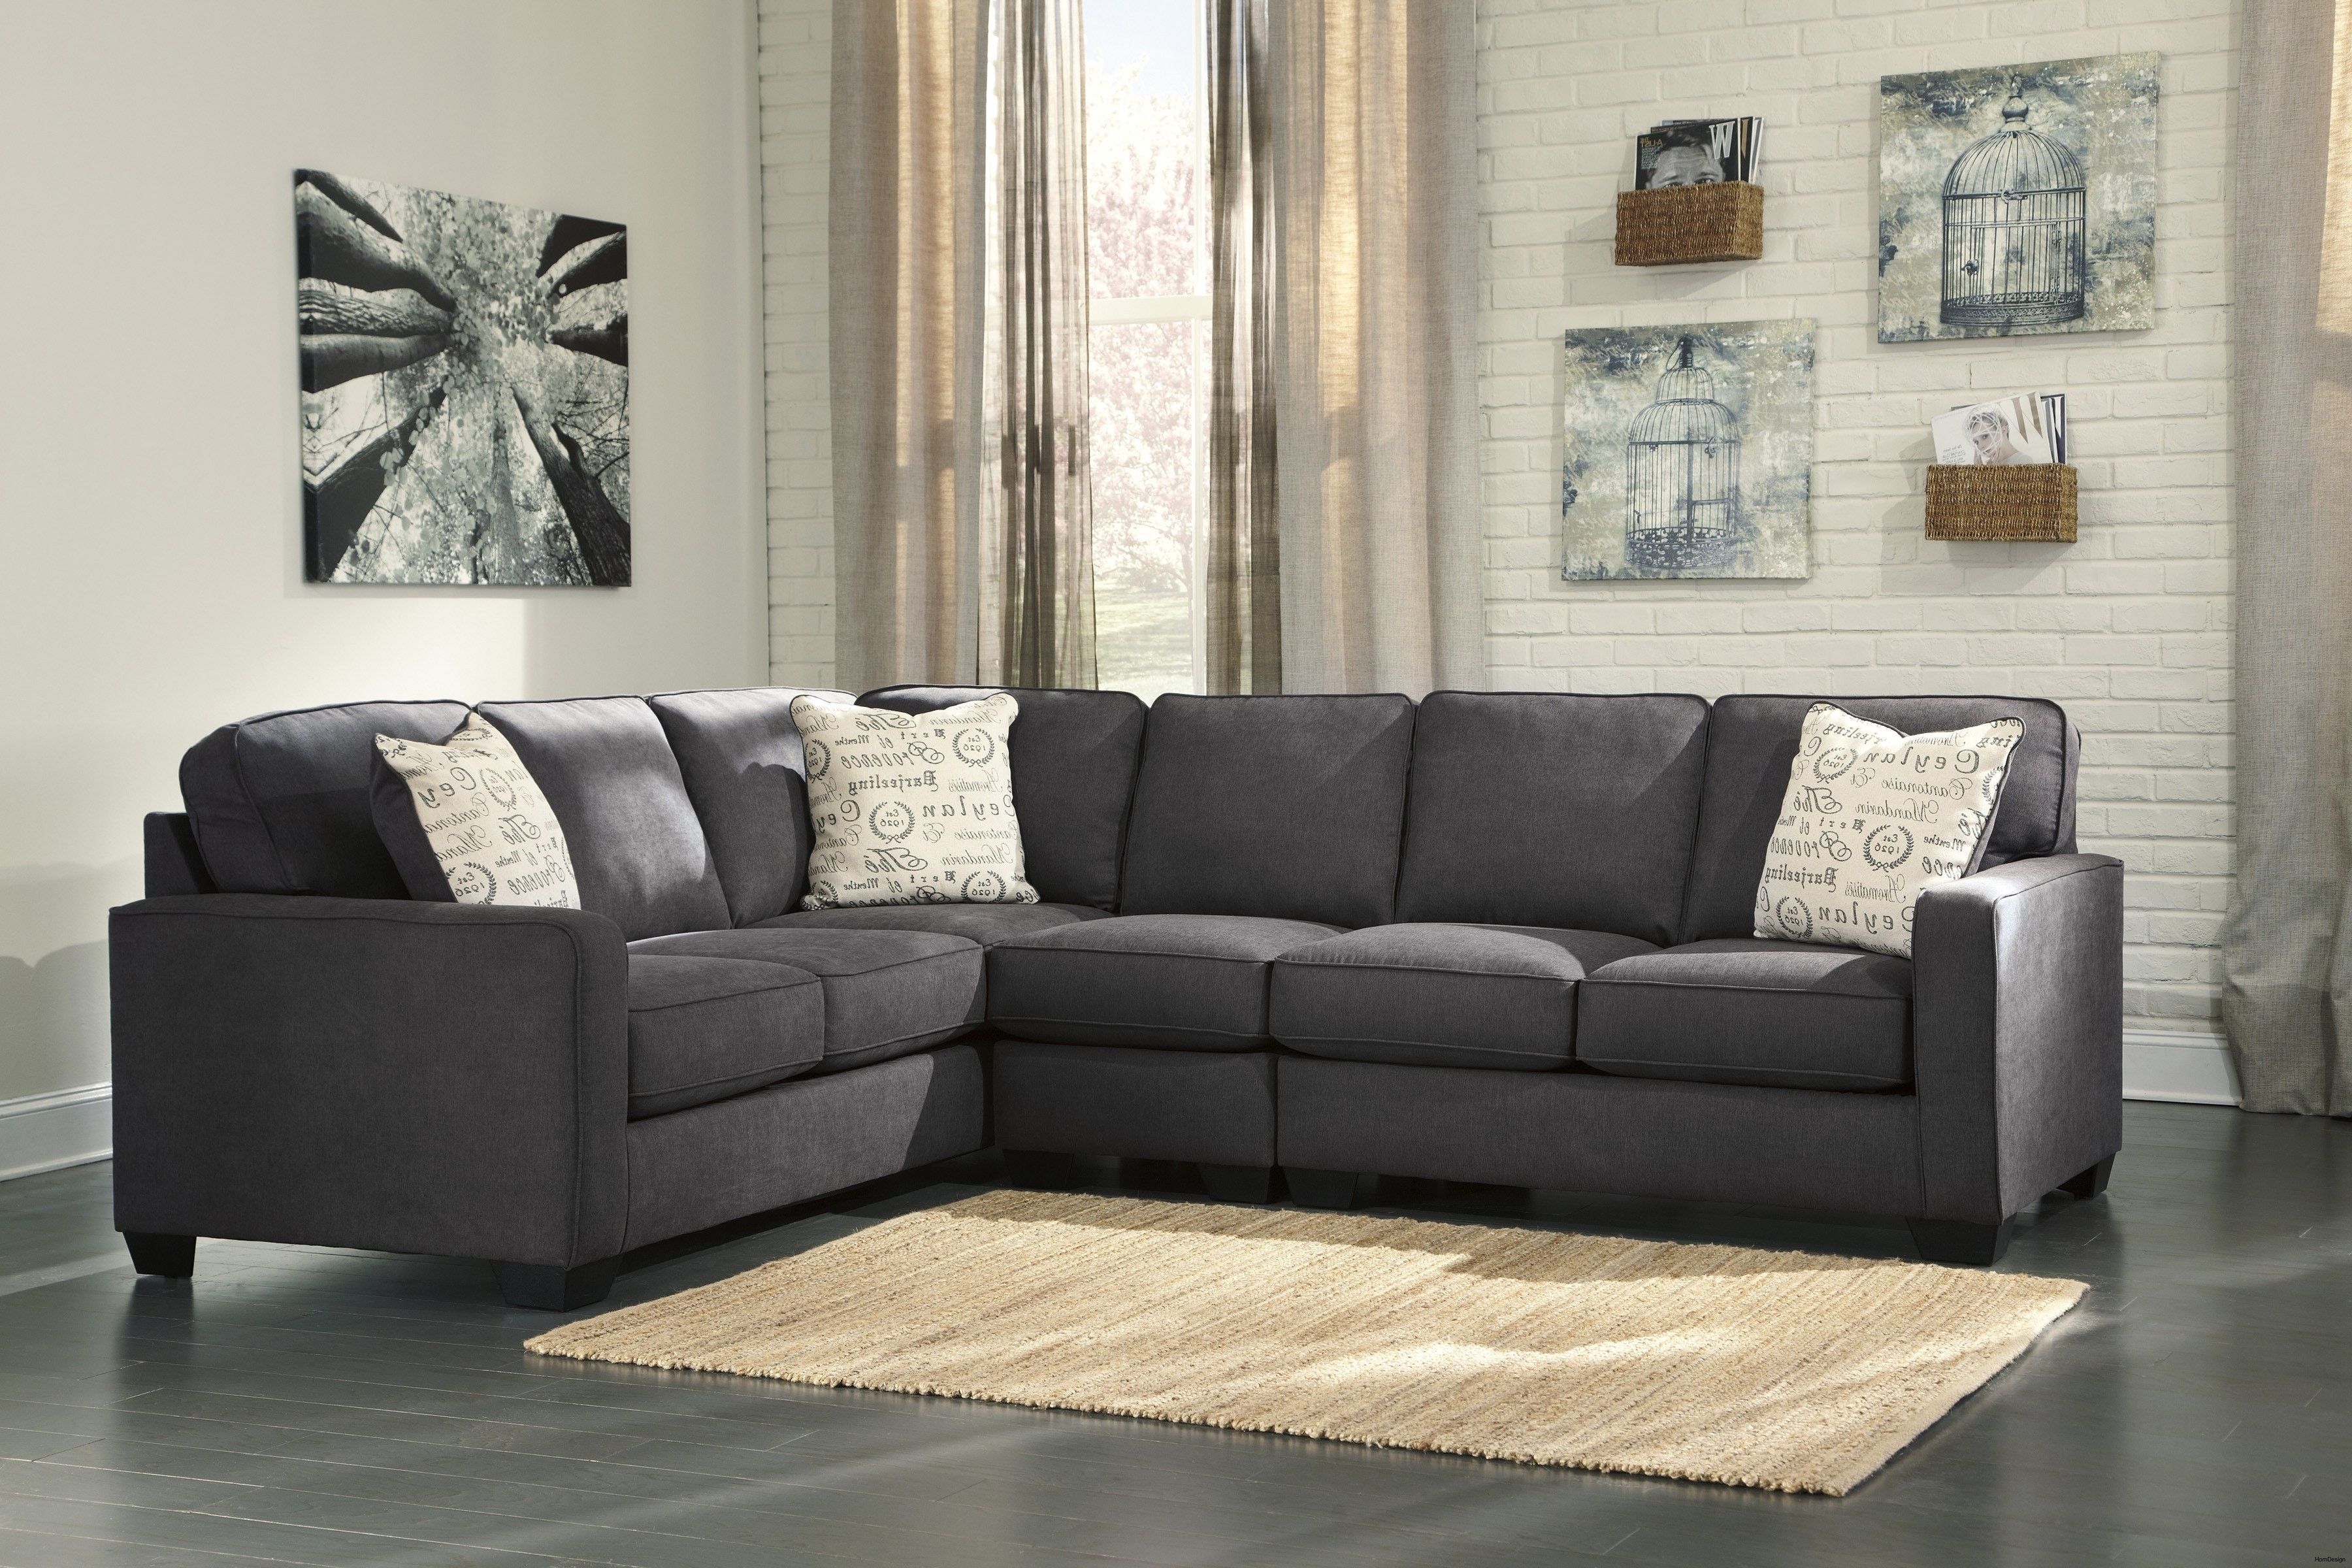 3 Piece Sectional Sofa With Chaise Reviews | Baci Living Room Intended For Meyer 3 Piece Sectionals With Laf Chaise (Photo 30 of 30)